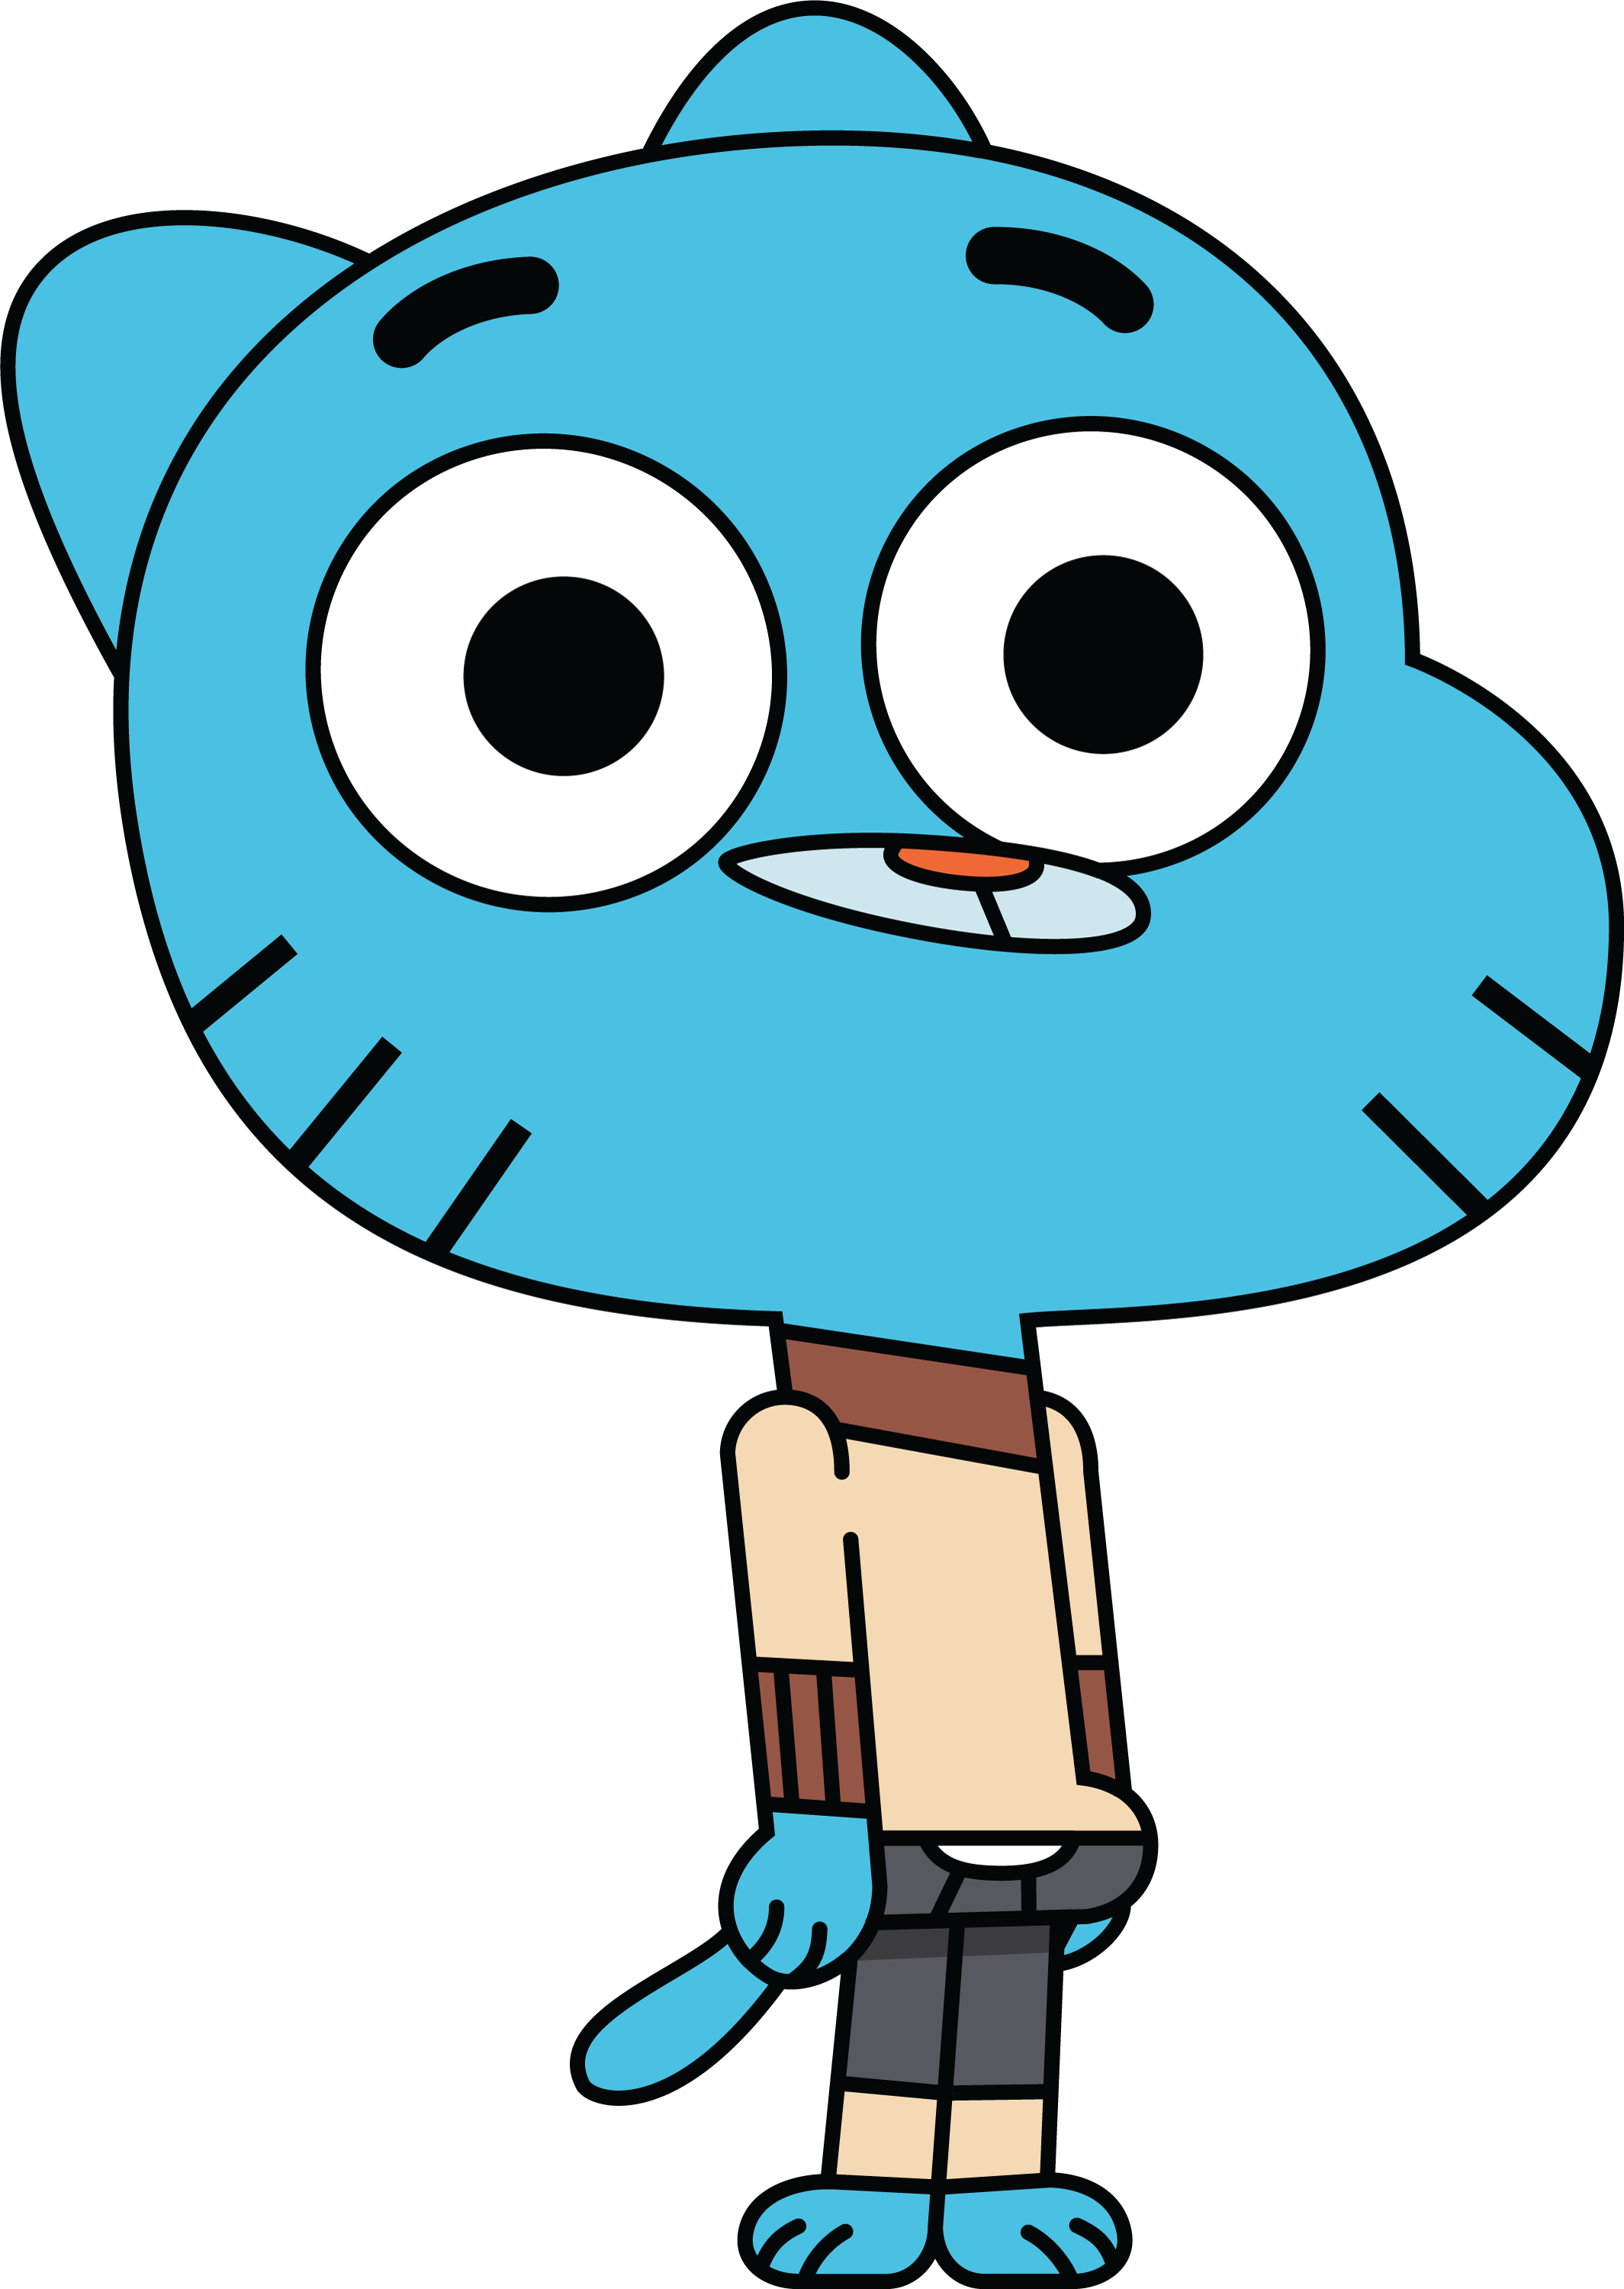 Gumball watterson updated his profile - Gumball watterson